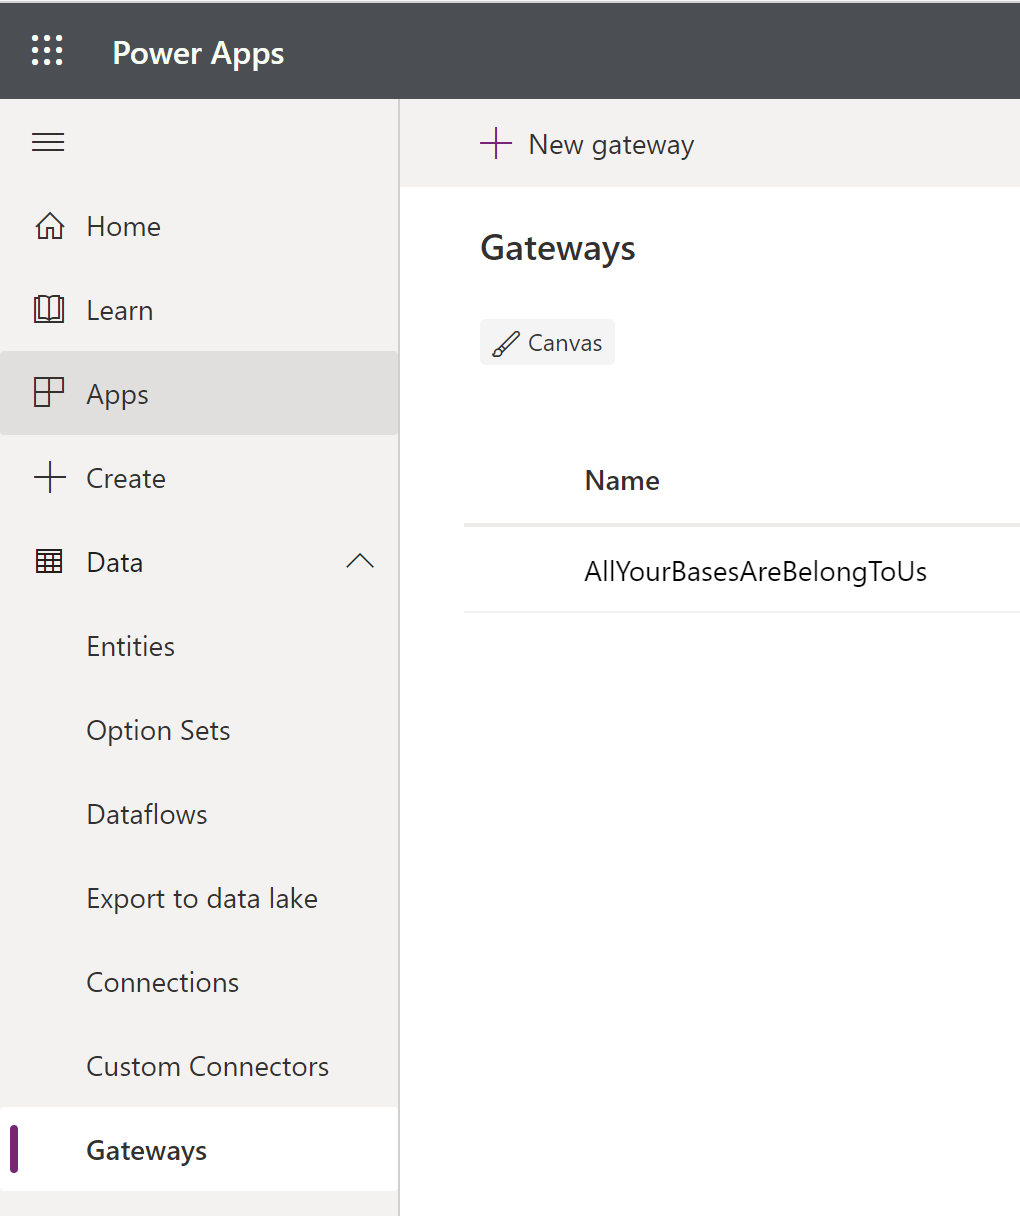 Link to download gateway from Power Apps